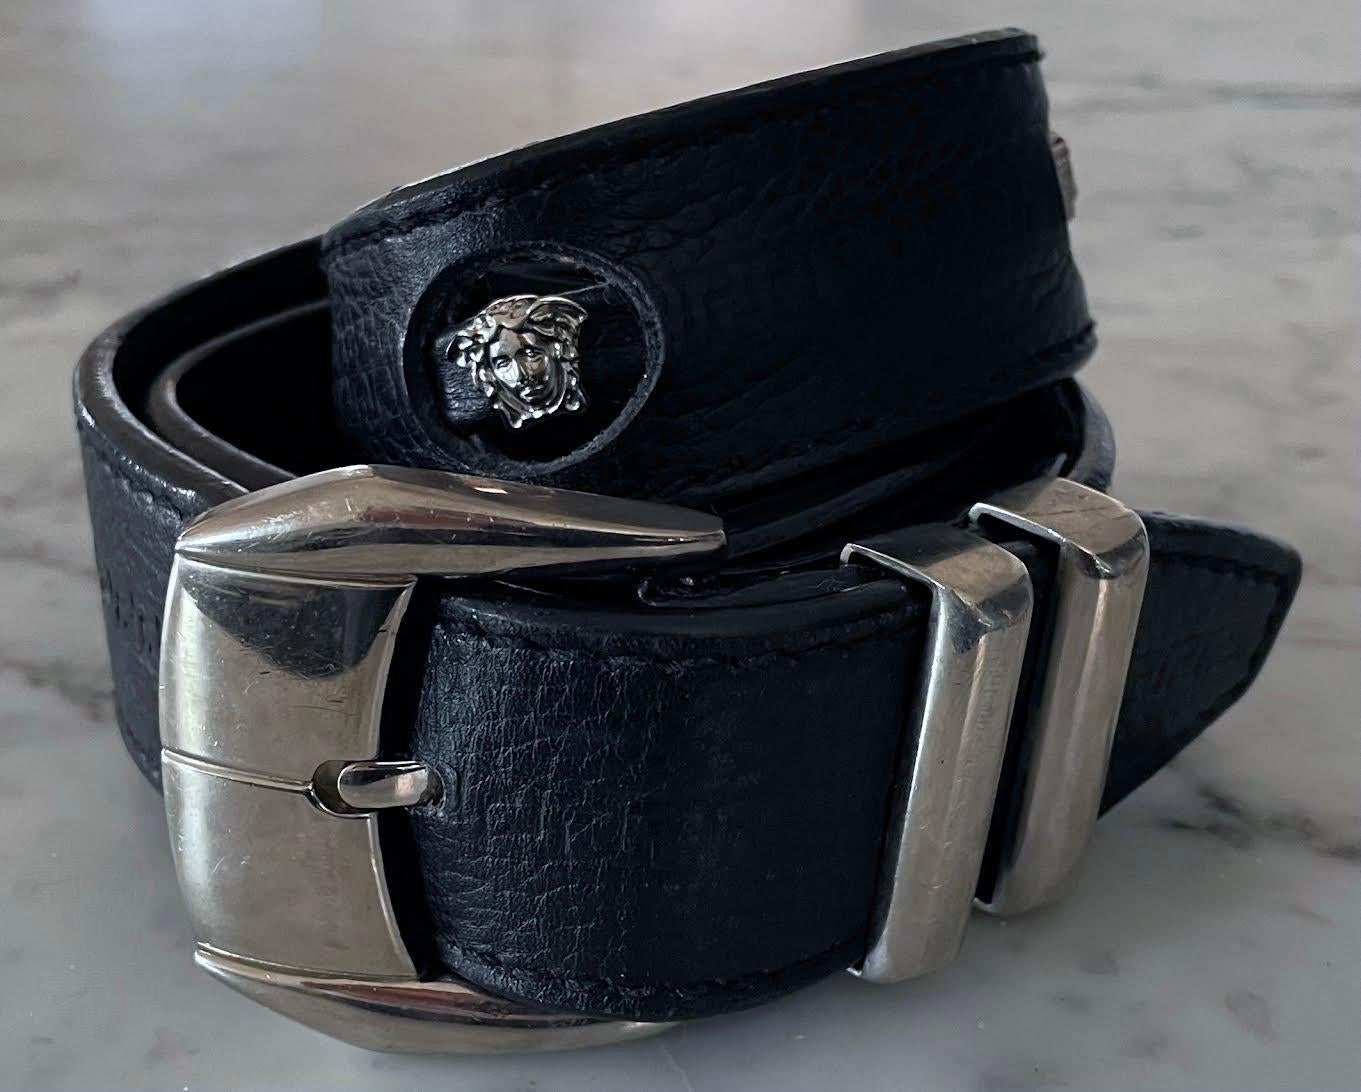 Textured black leather belt with Greek key stamping and cutouts with silver-tone Medusa heads designed by Gianni Versace dating to the 1990's. Belt is labeled a size 70. Belt holes fall at 26